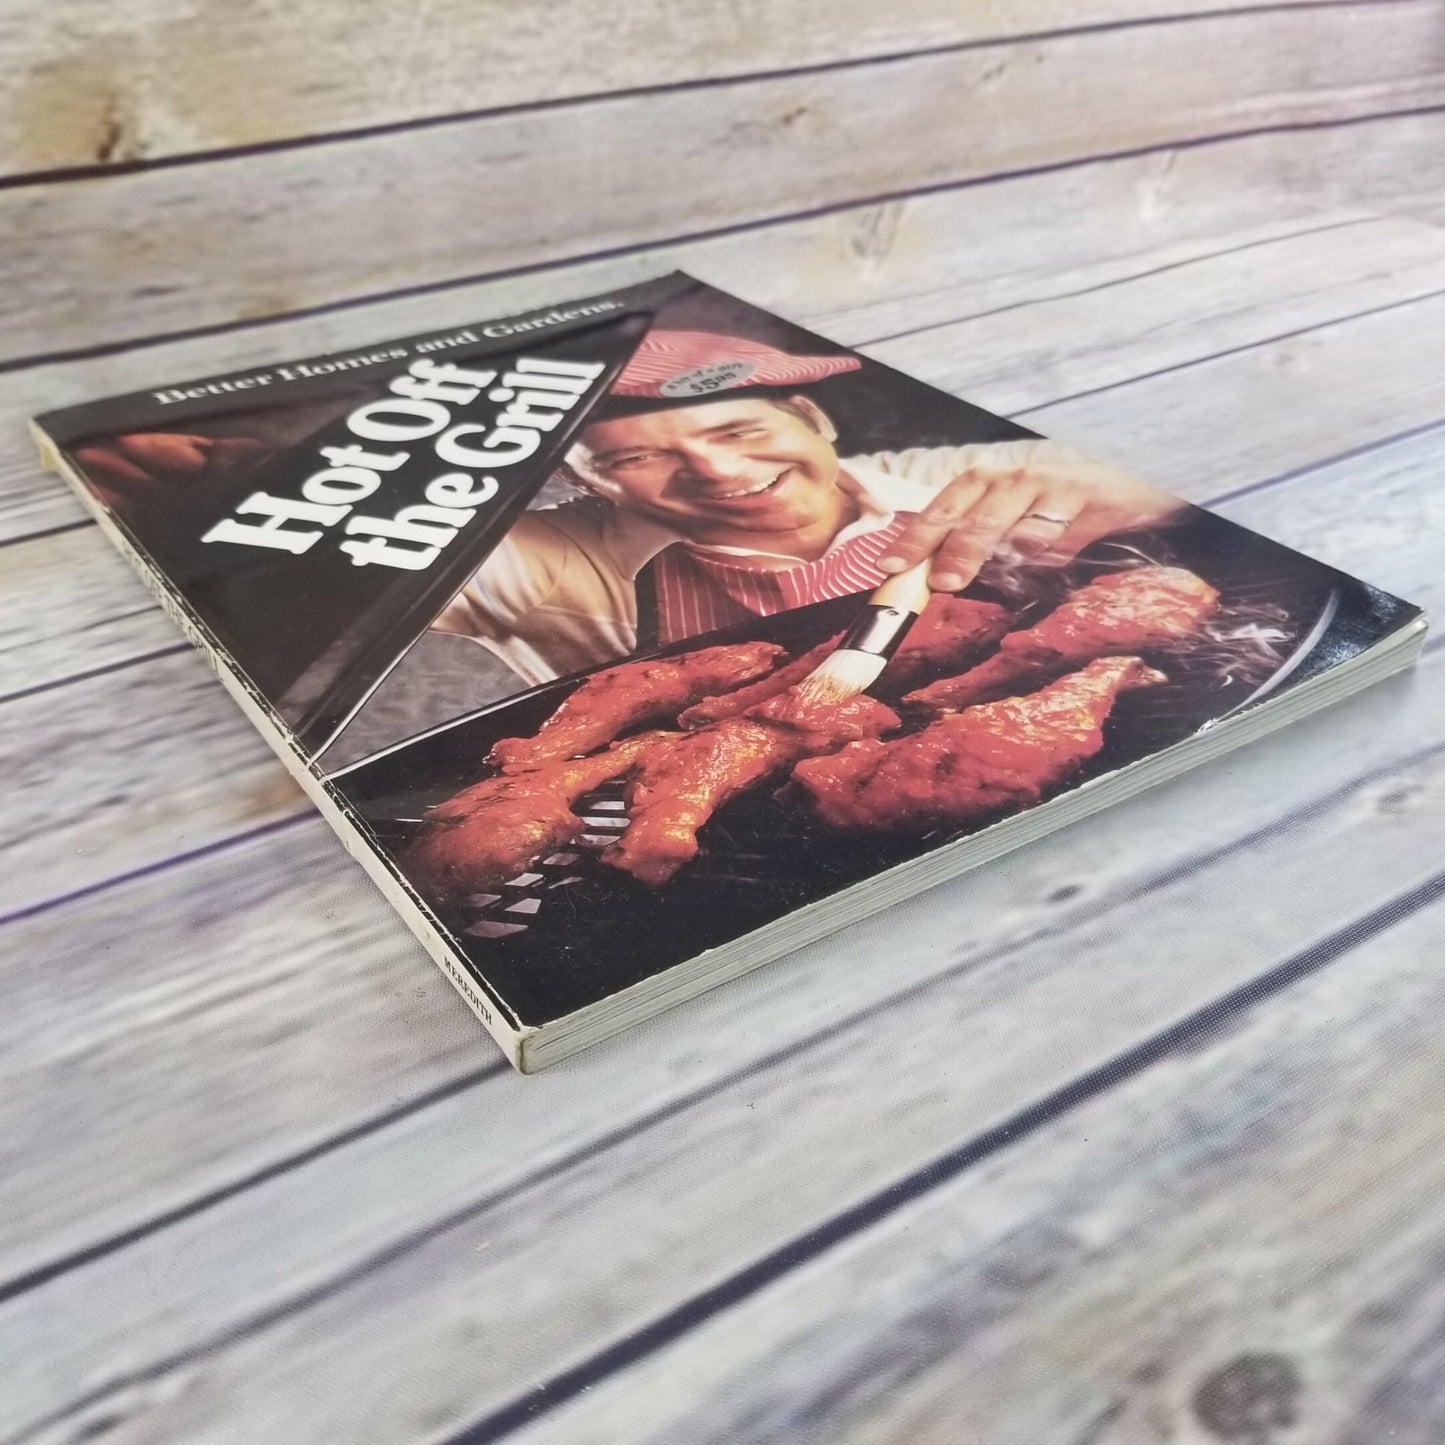 Vintage Cookbook Hot Off the Grill Recipes 1987 Outdoor Cooking BBQ Barbecue Paperback Better Homes and Gardens